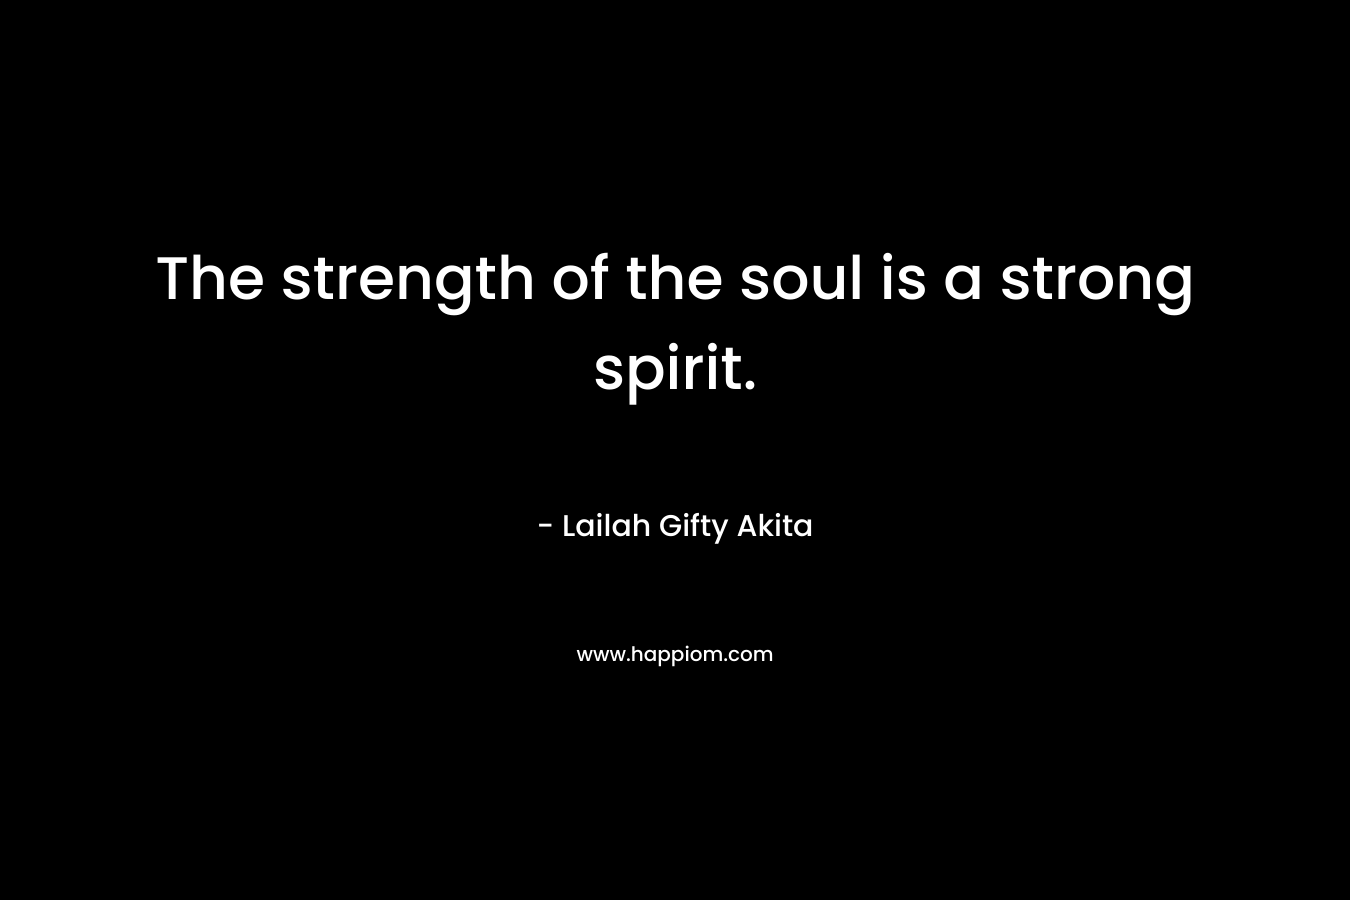 The strength of the soul is a strong spirit.